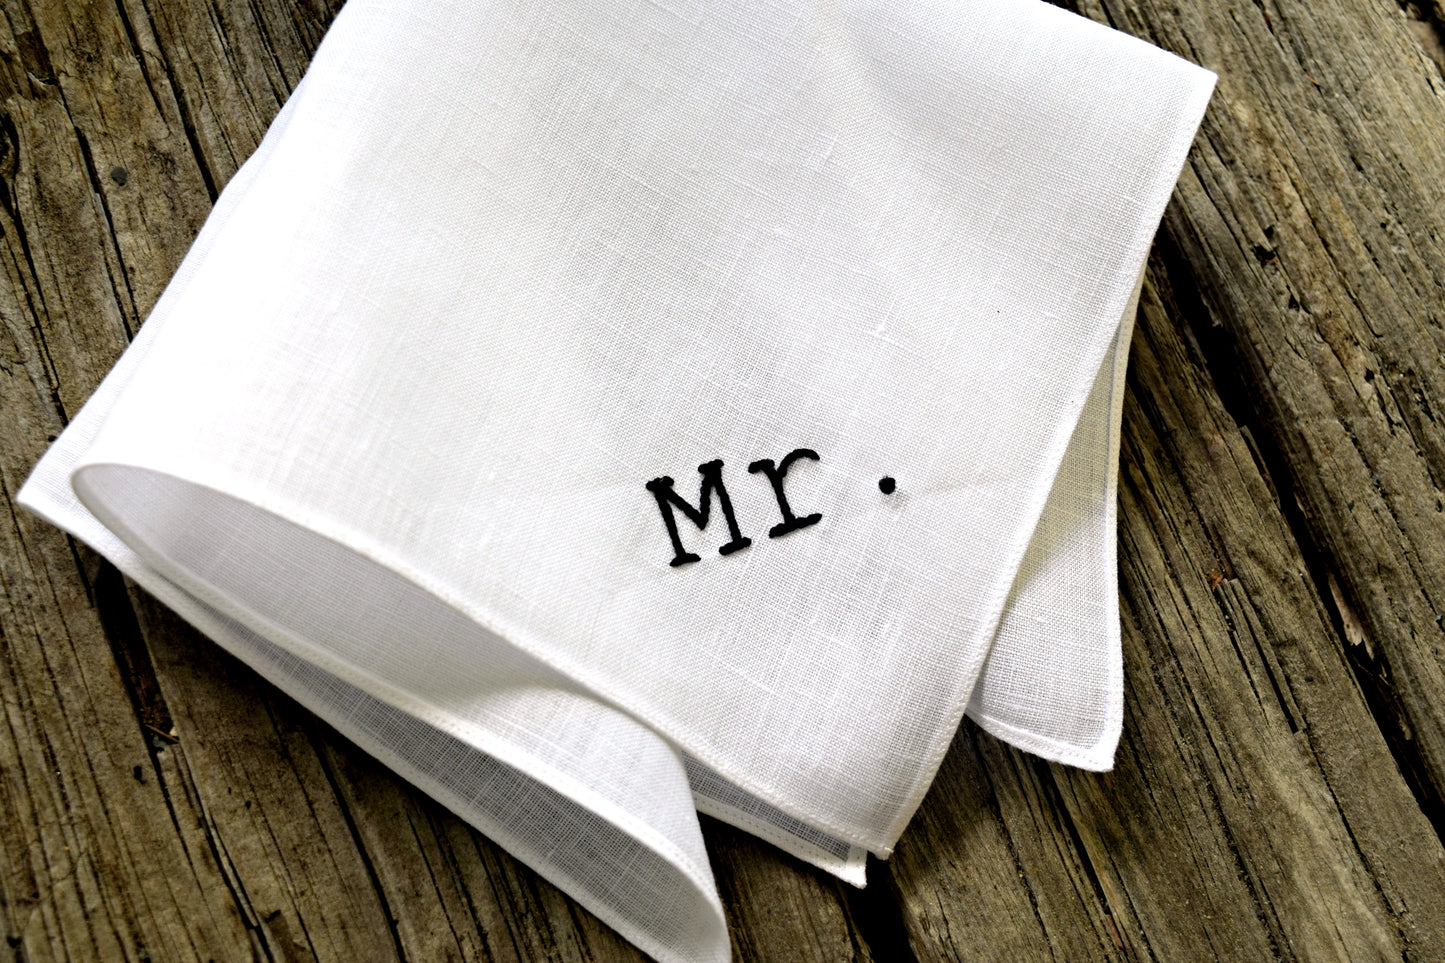 White Irish linen pocket square hand embroidered with Mr. in a typewriter font